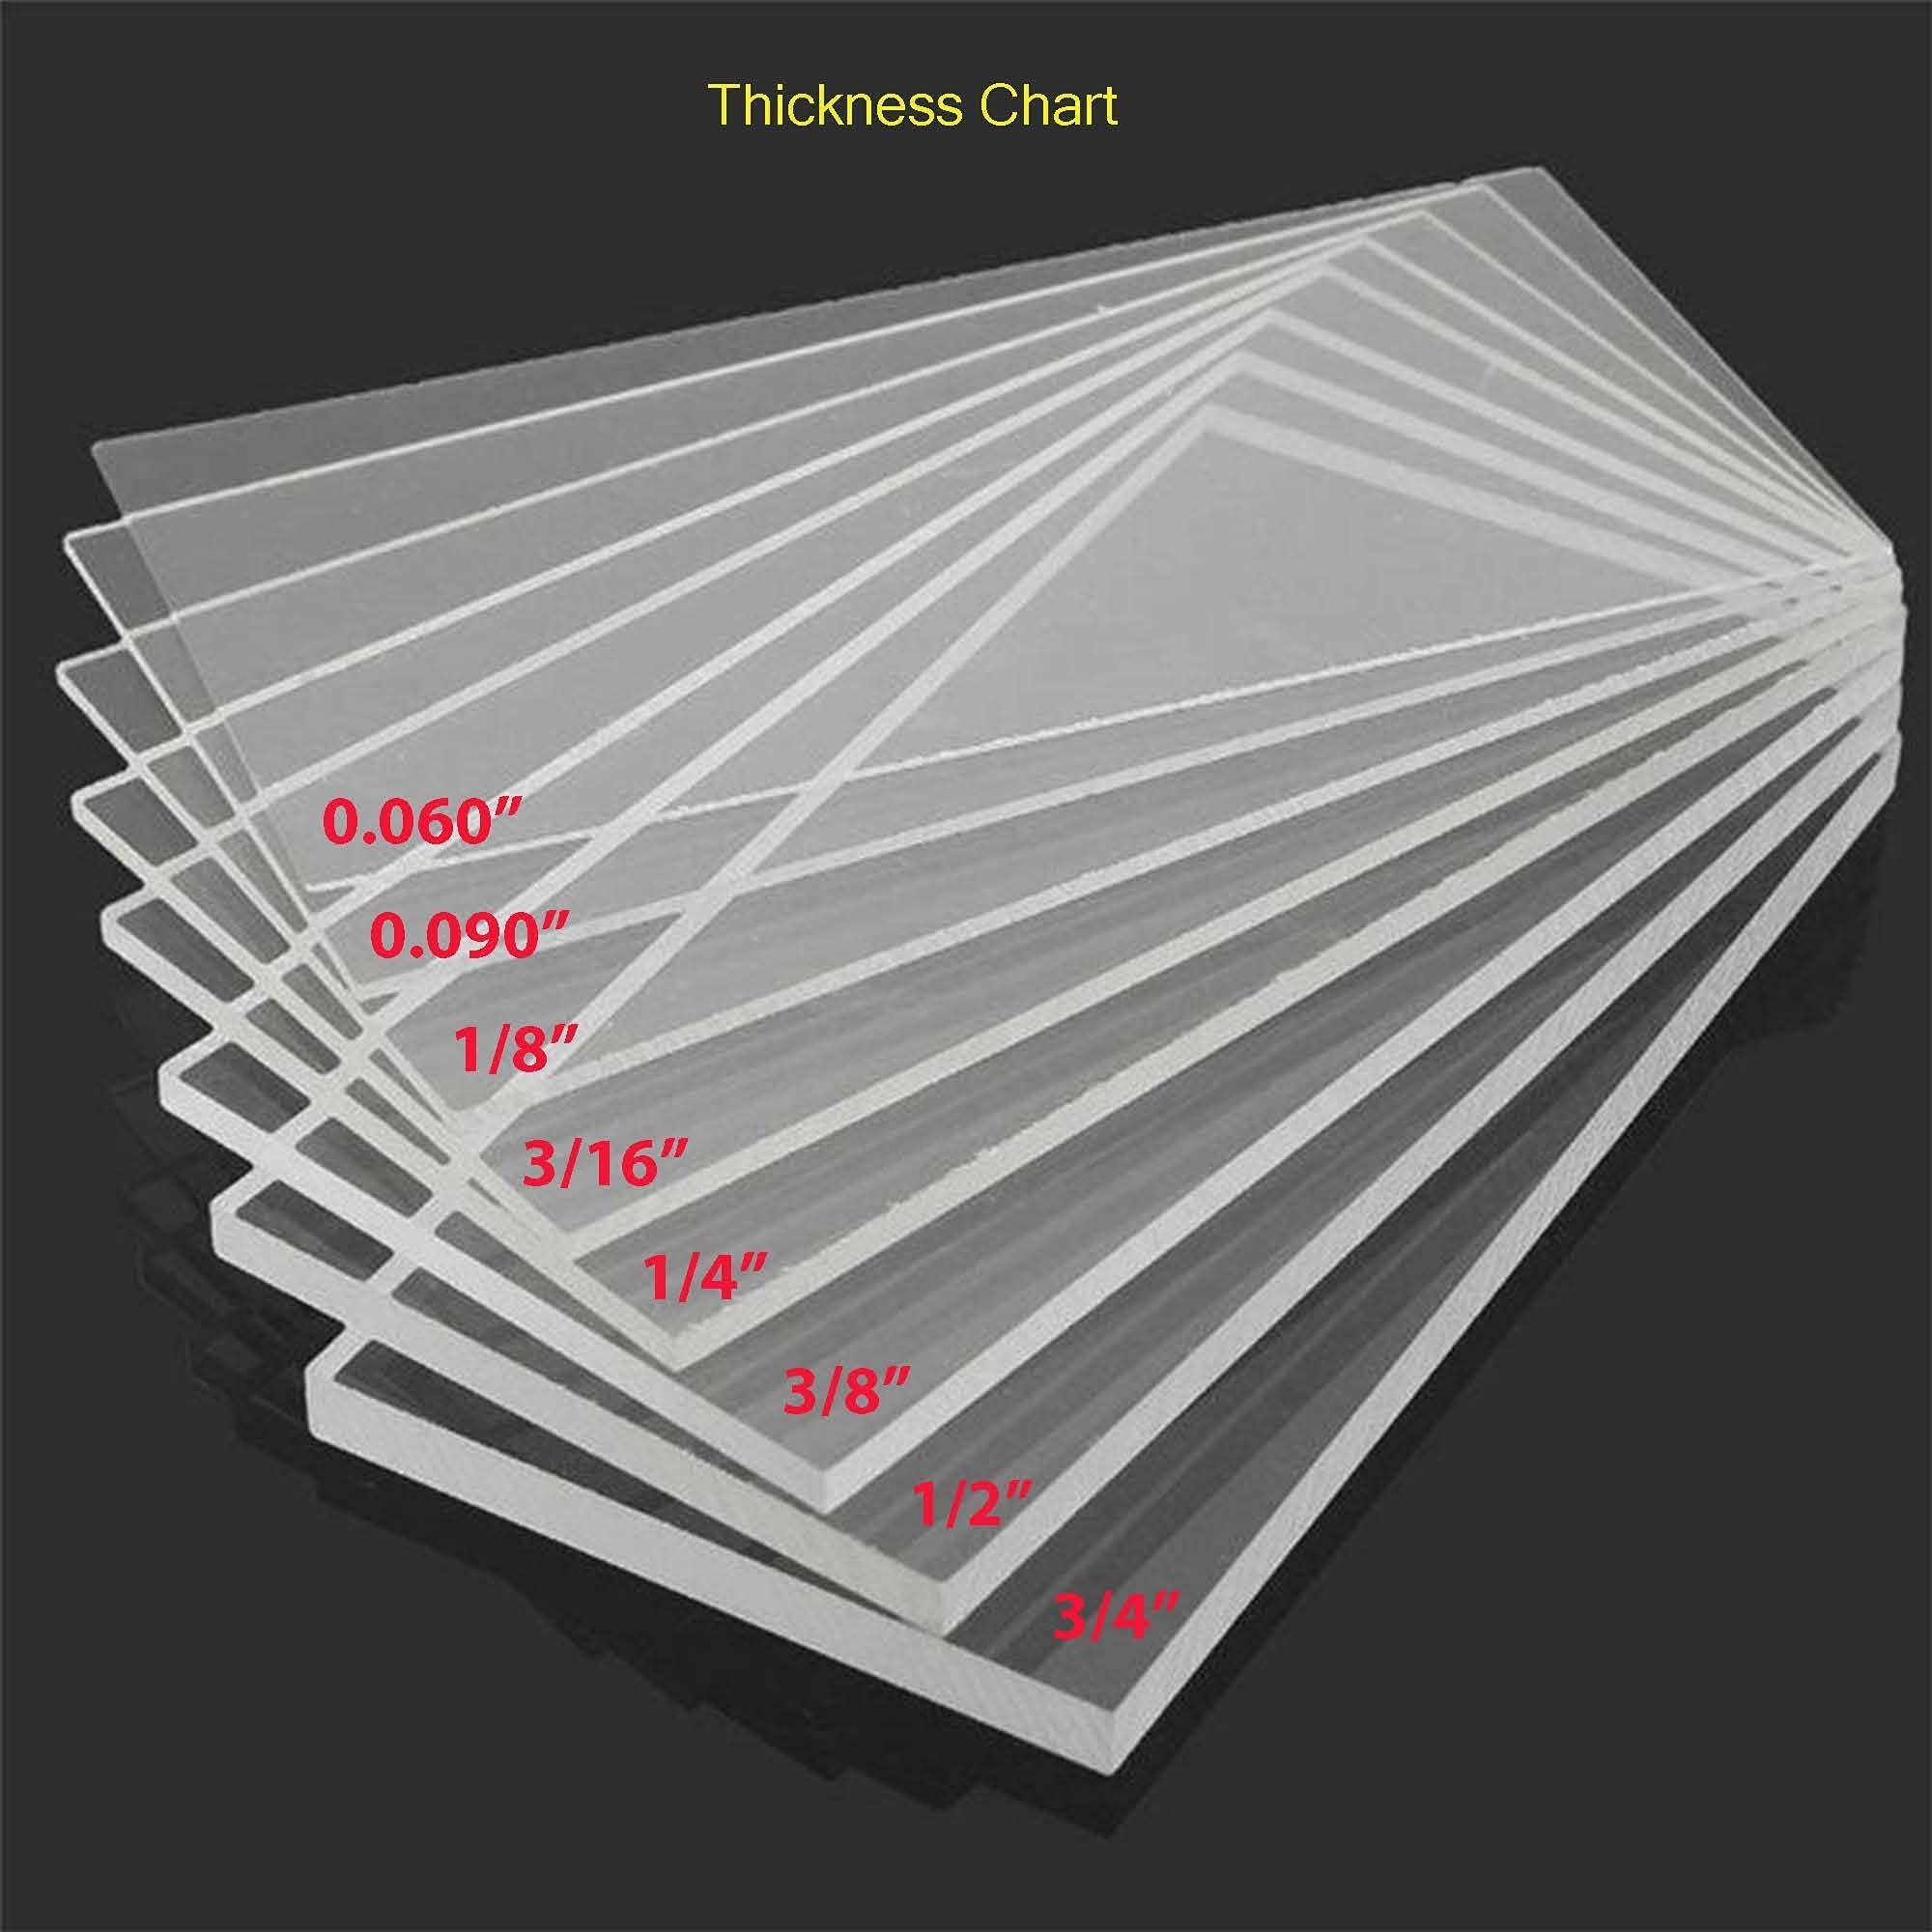 3/16" Thickness Co-Extruded Acrylic Various Color and sizes